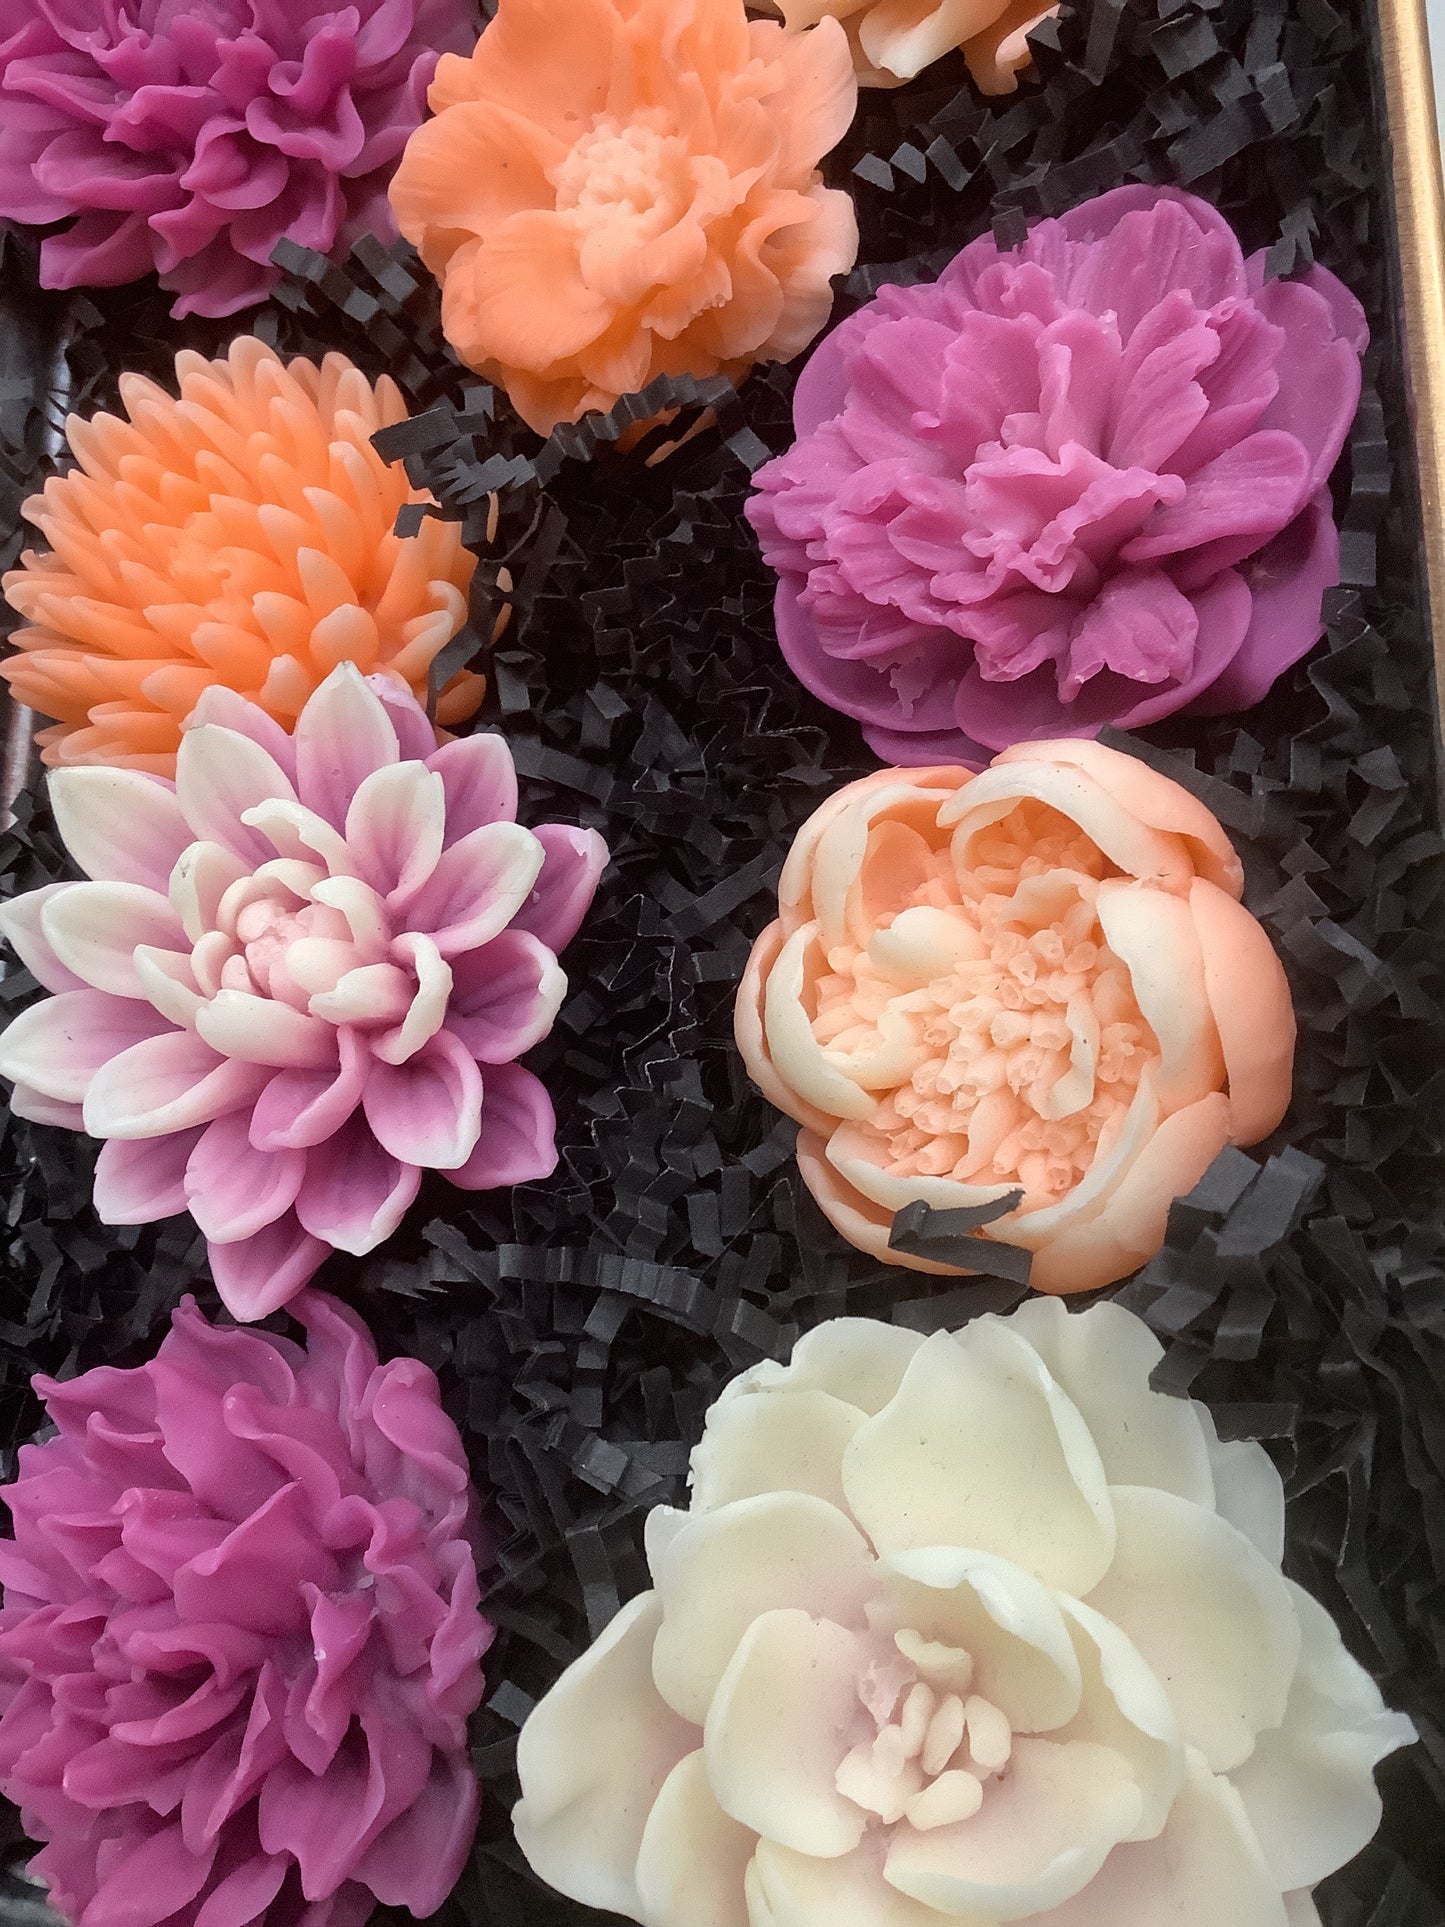 Flower Soap - Luxurious and Scented!